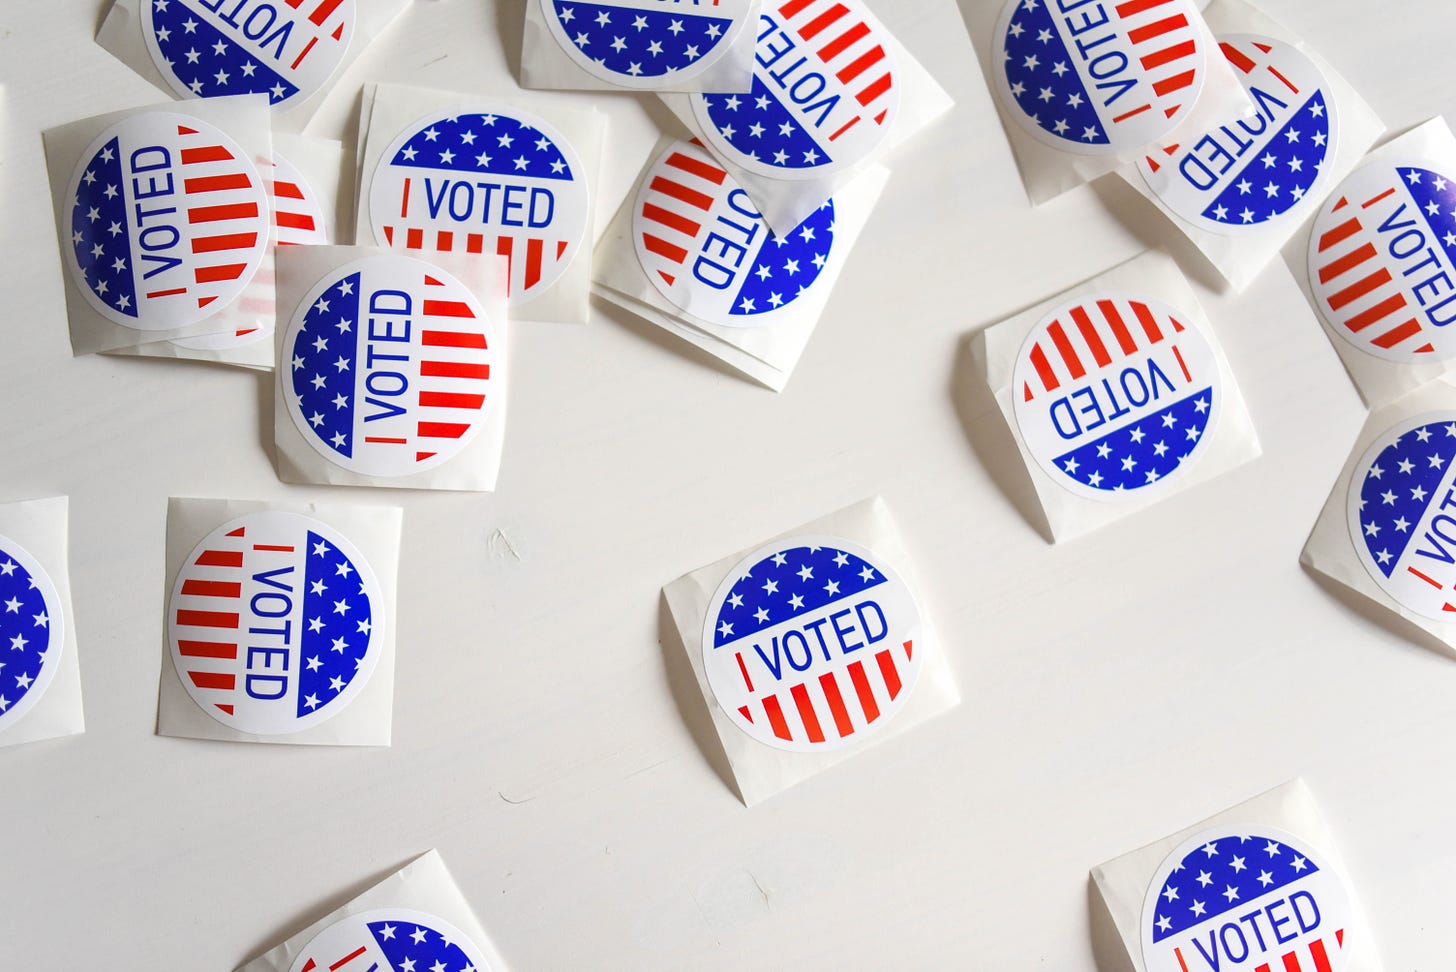 Various "I Voted" stickers used in US elections